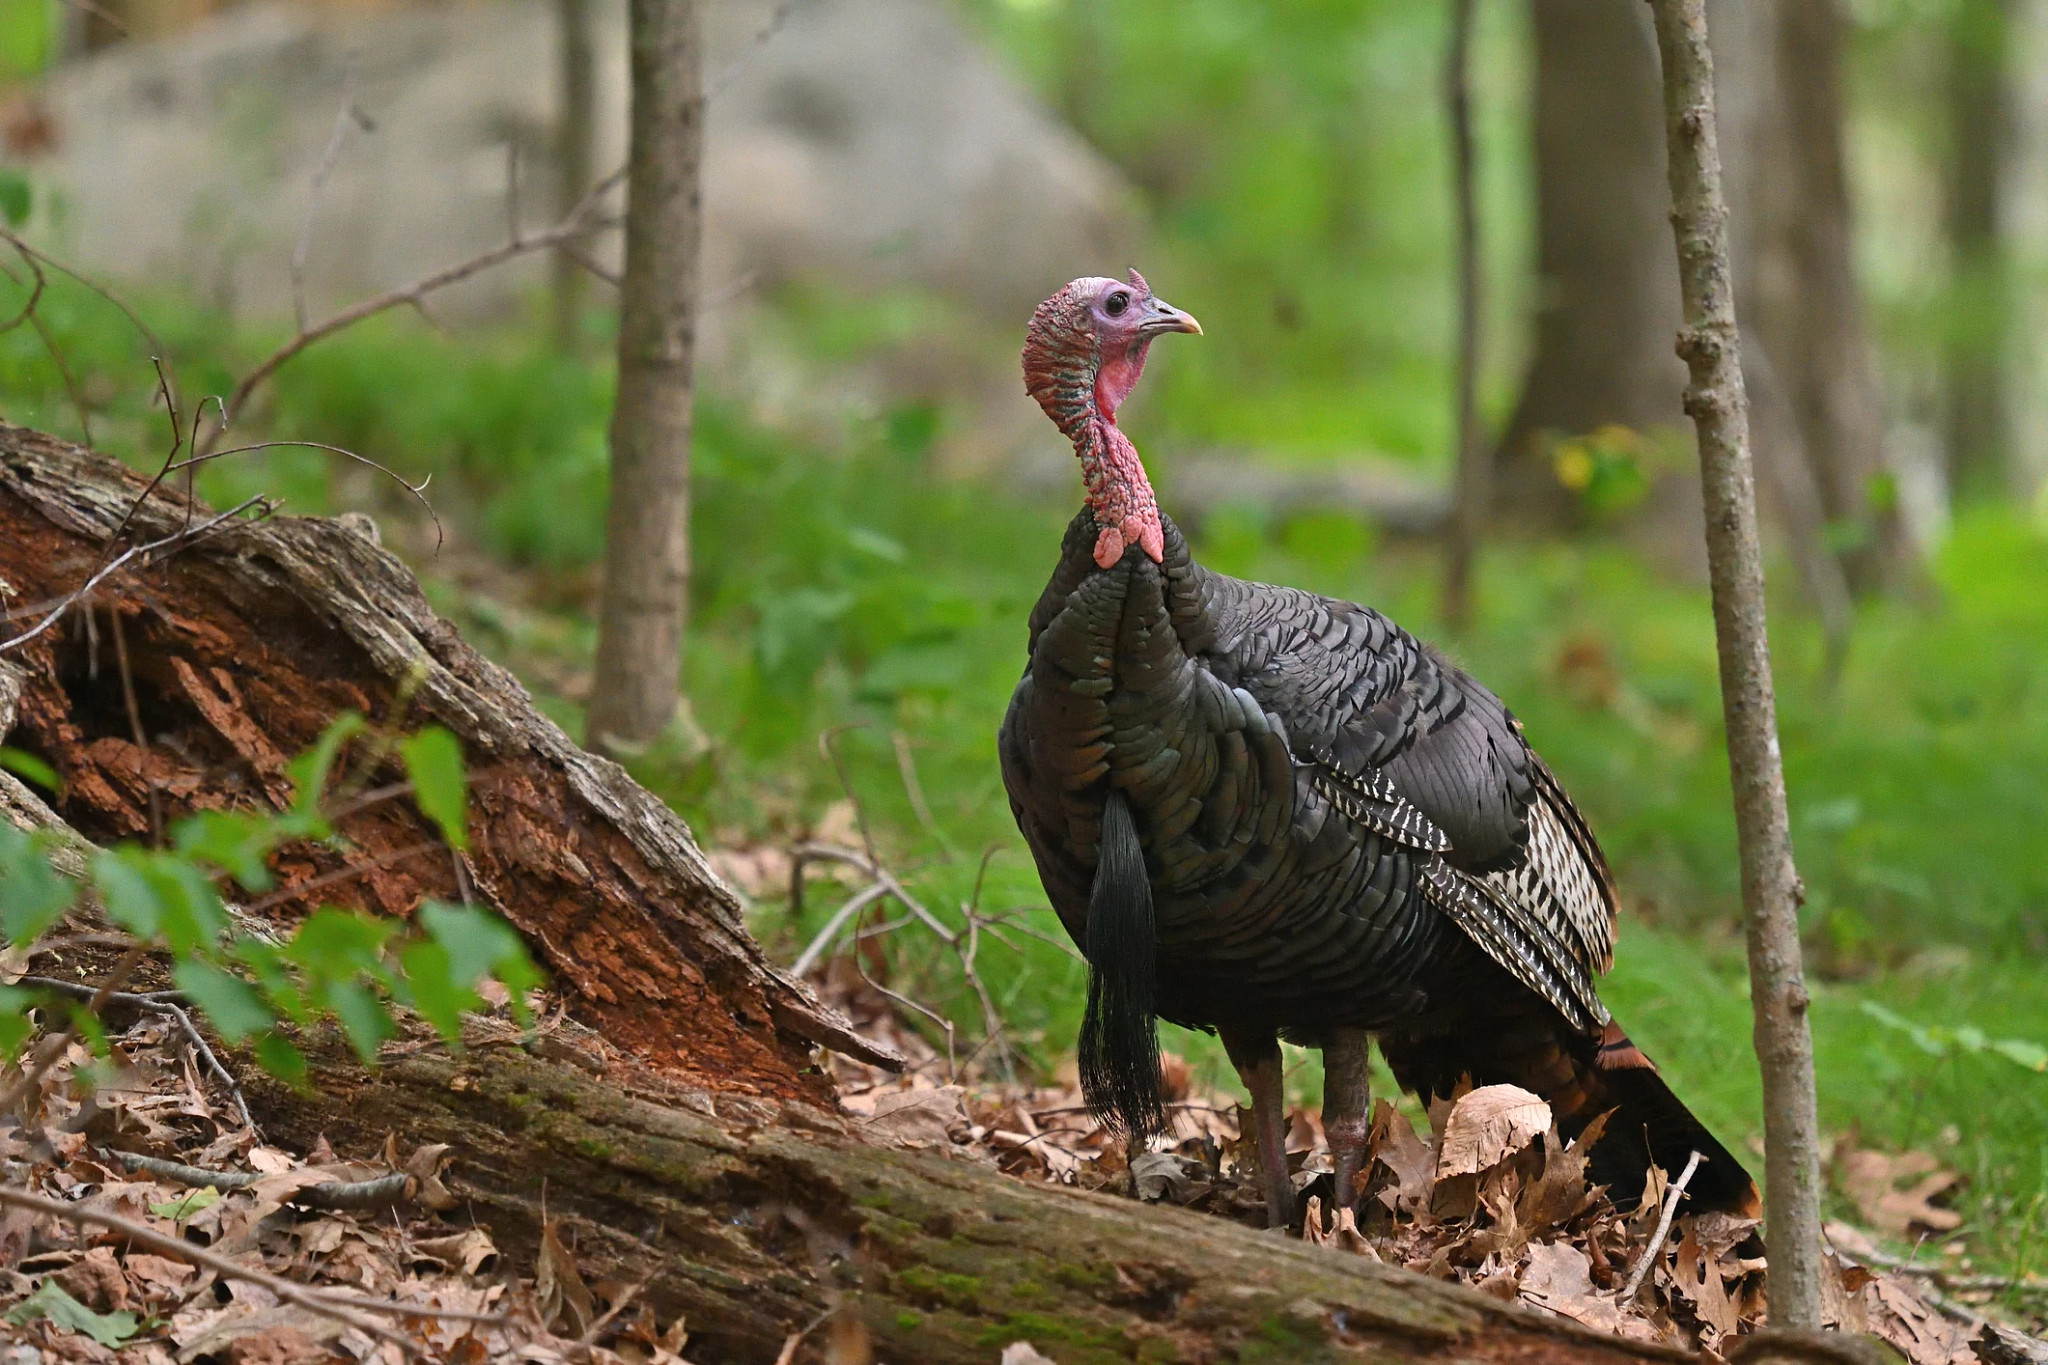 Male wild turkey in deep woods, looking over shoulder, with a boulder in the background.